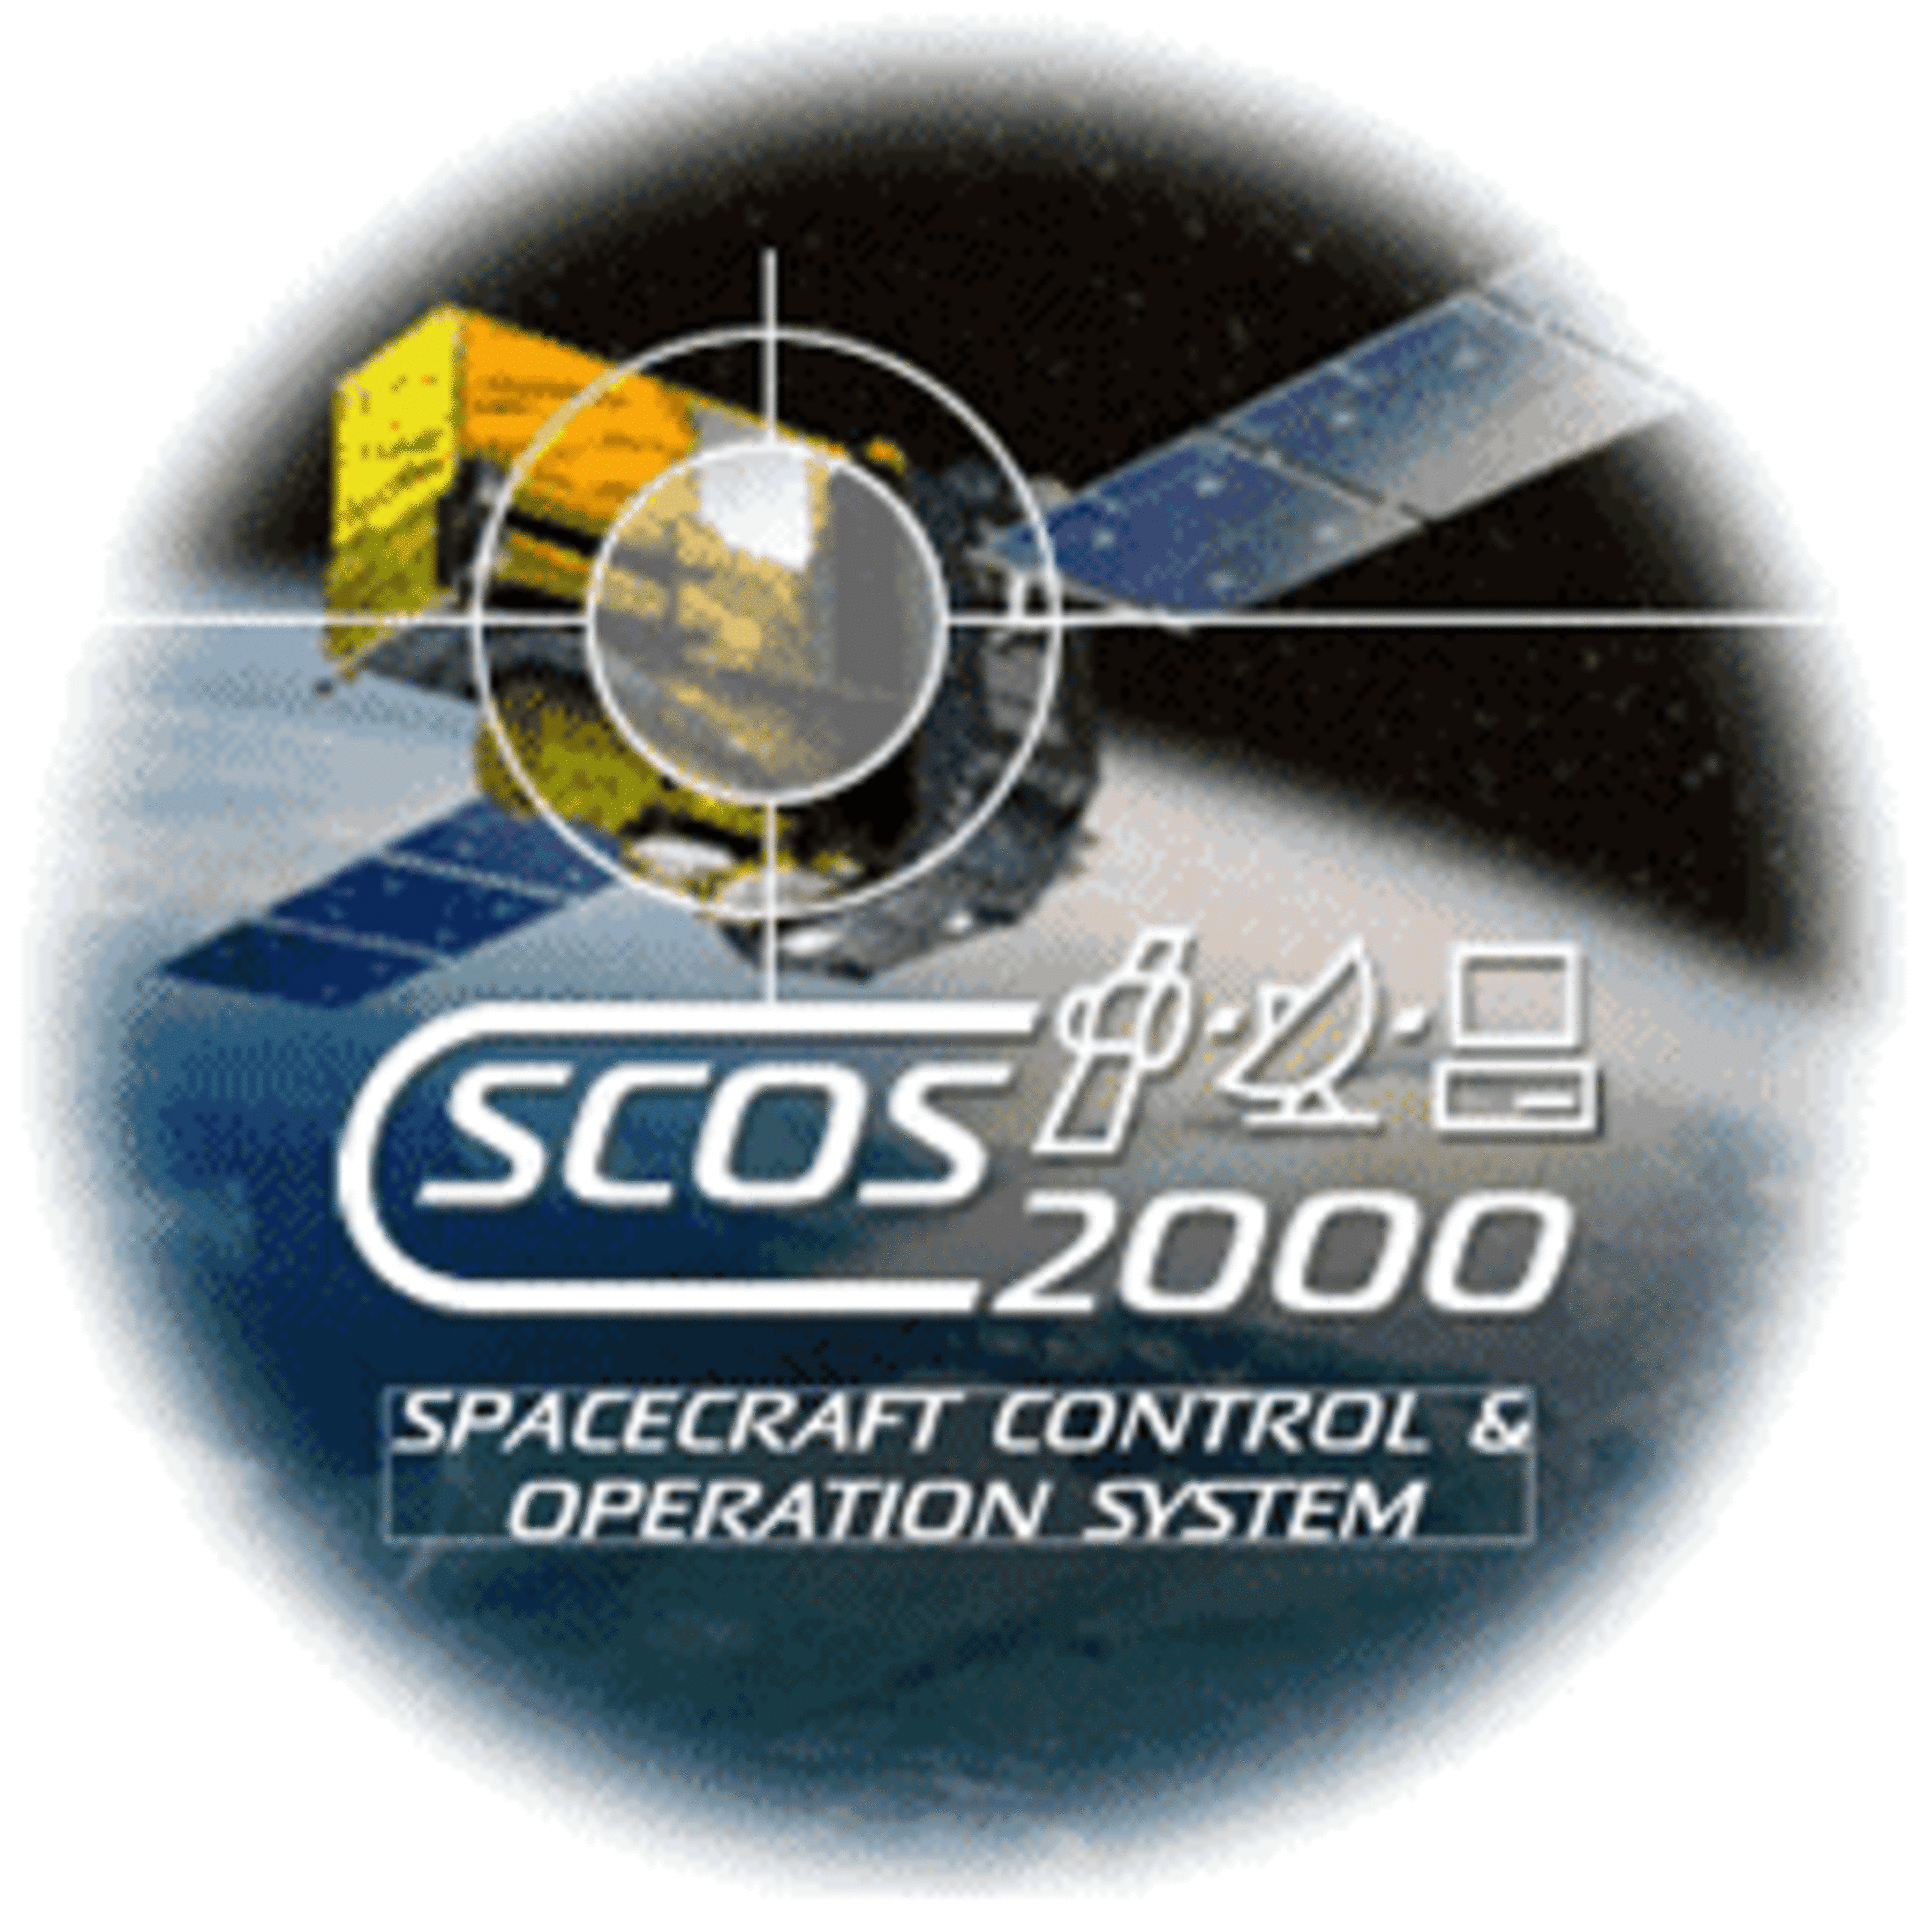 SCOS 2000 mission control systems